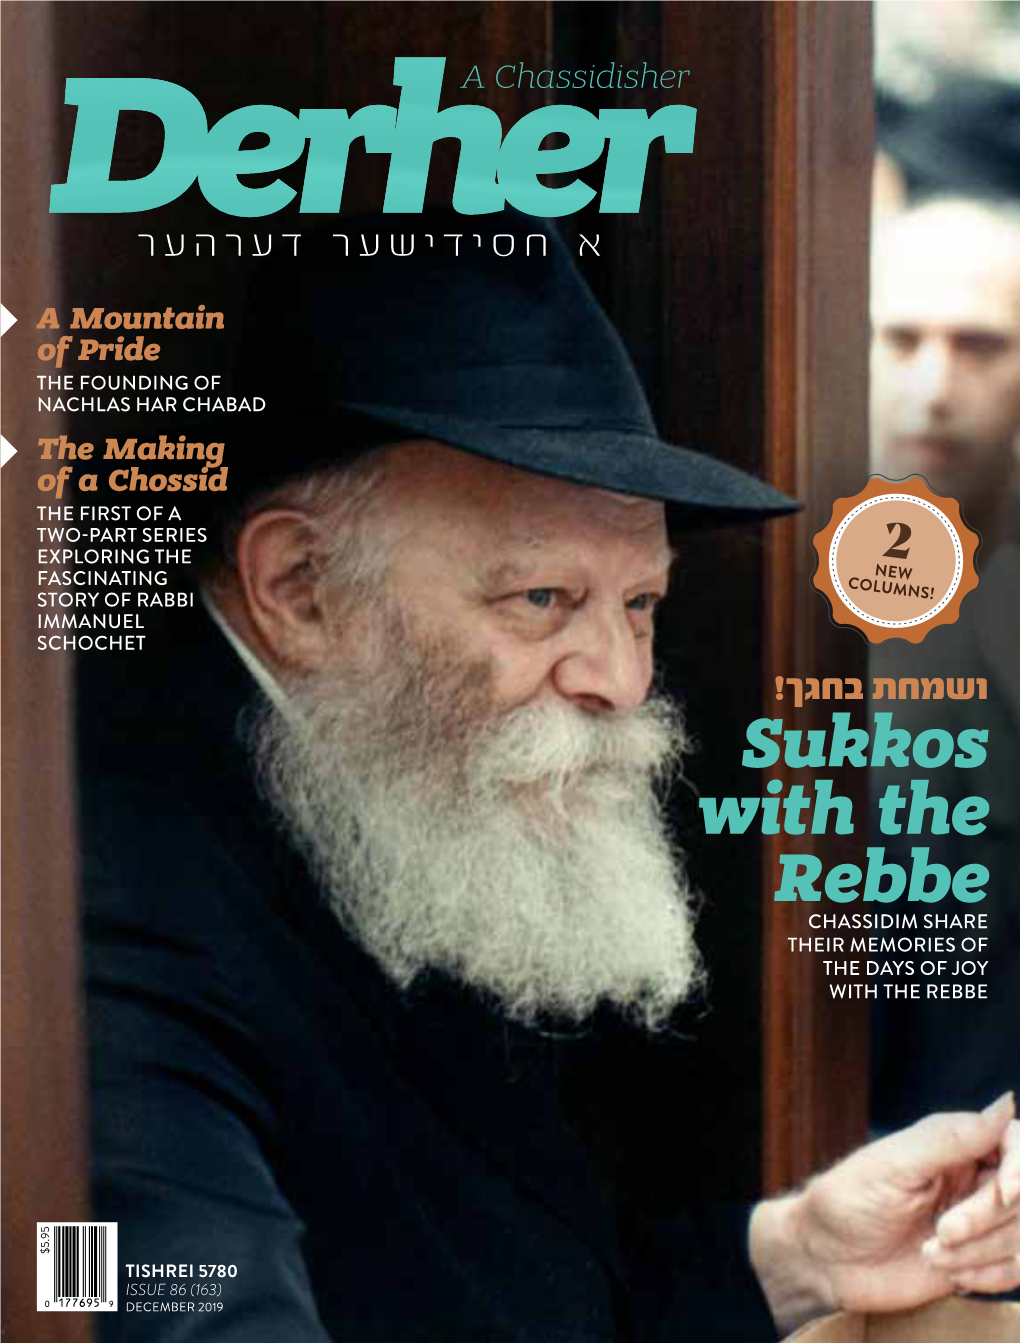 Sukkos with the Rebbe CHASSIDIM SHARE THEIR MEMORIES of the DAYS of JOY with the REBBE $5.95 TISHREI 5780 ISSUE 86 (163) DECEMBER 2019 30